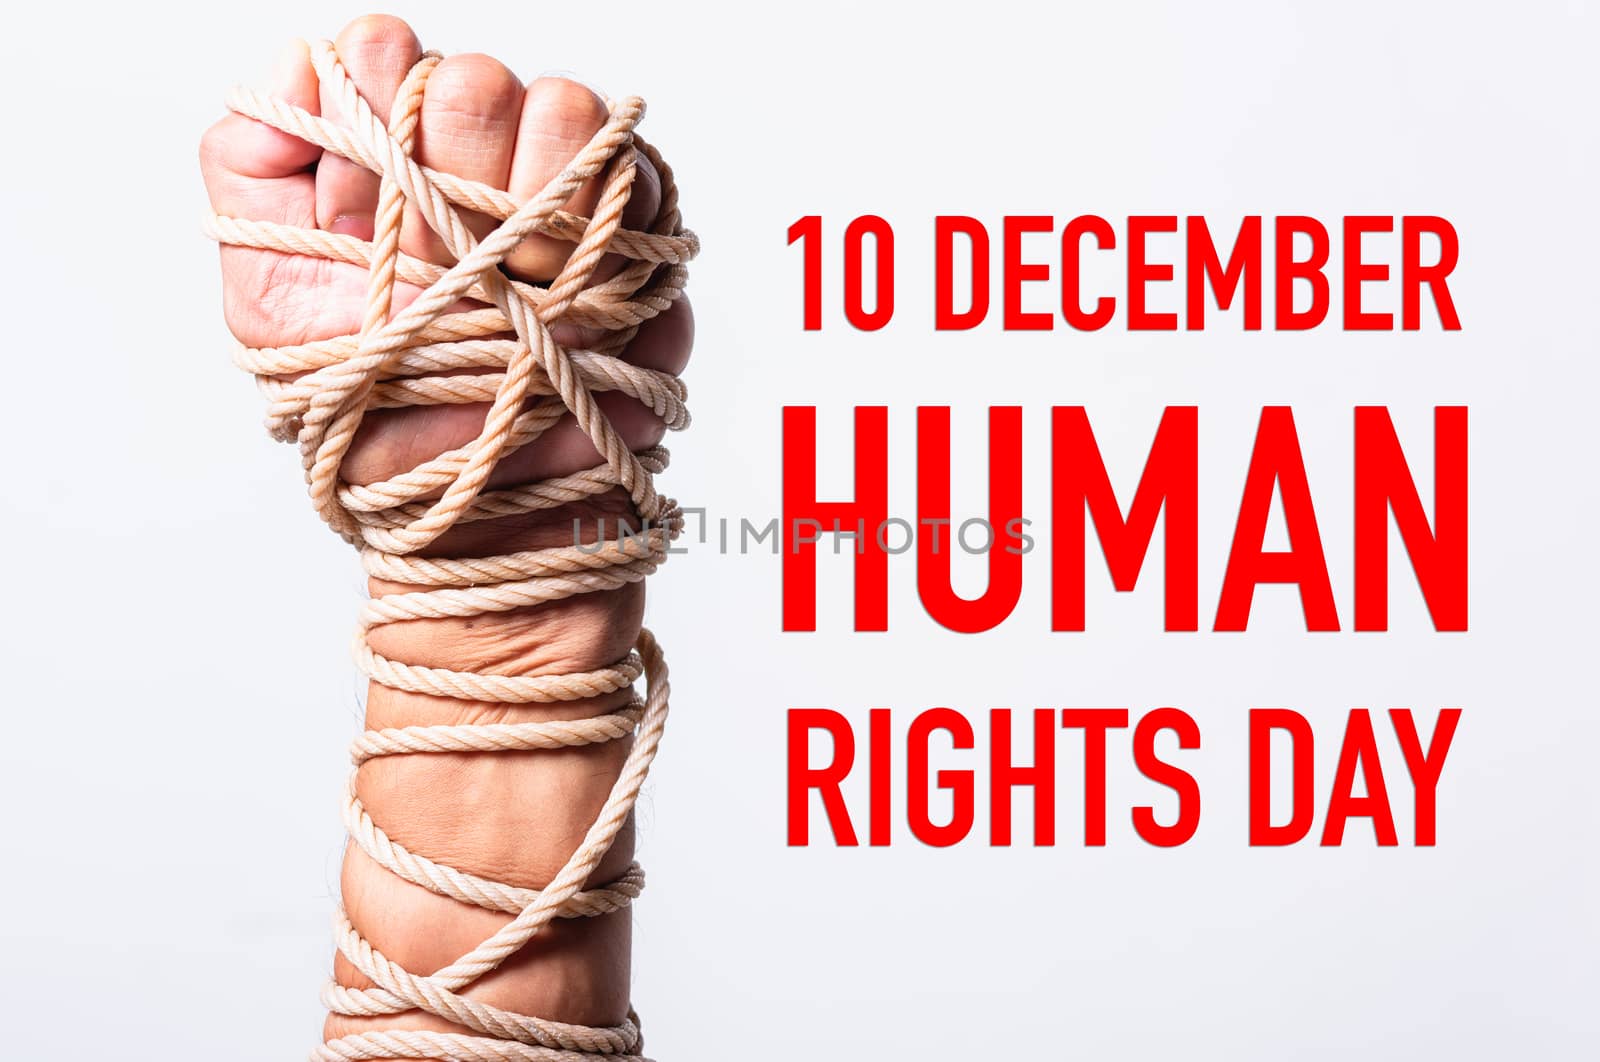 Rope on fist hand with 10 december HUMAN RIGHTS DAY text by Sorapop